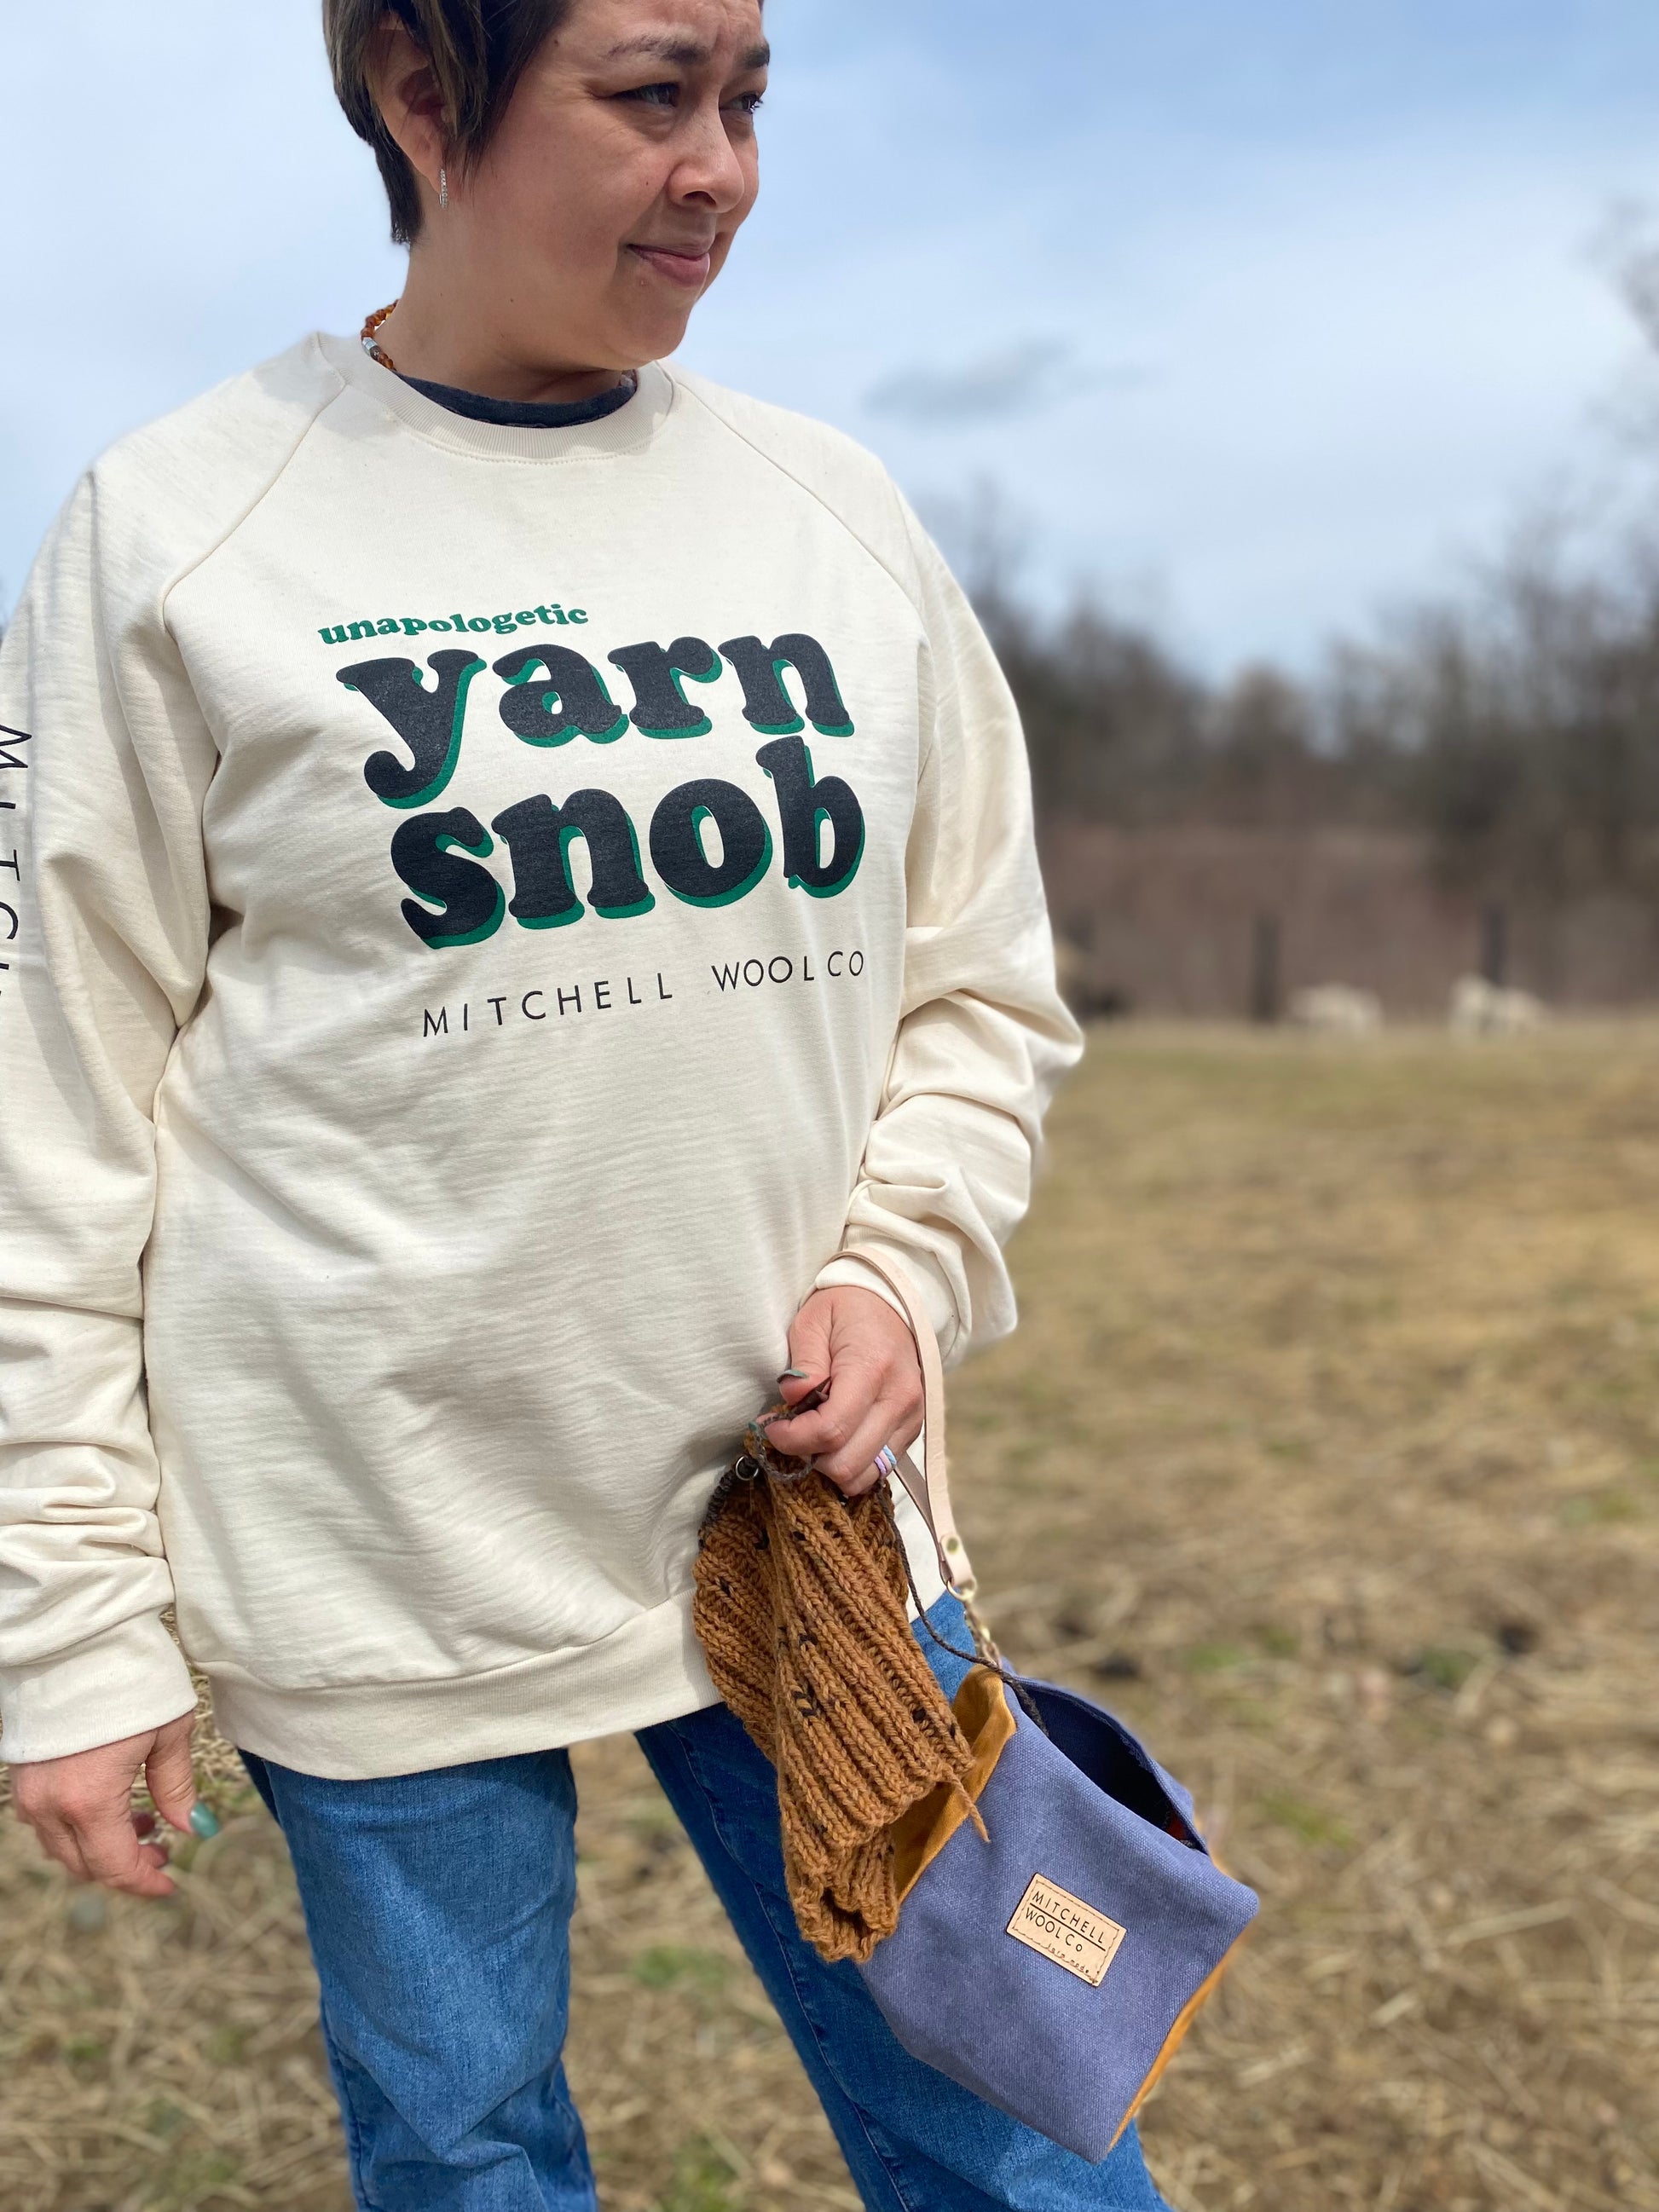 Bekah squints into the sun as she stands in the pasture wearing an organic natural colored cotton Yarn Snob sweatshirt and our yarn box knitting pouch